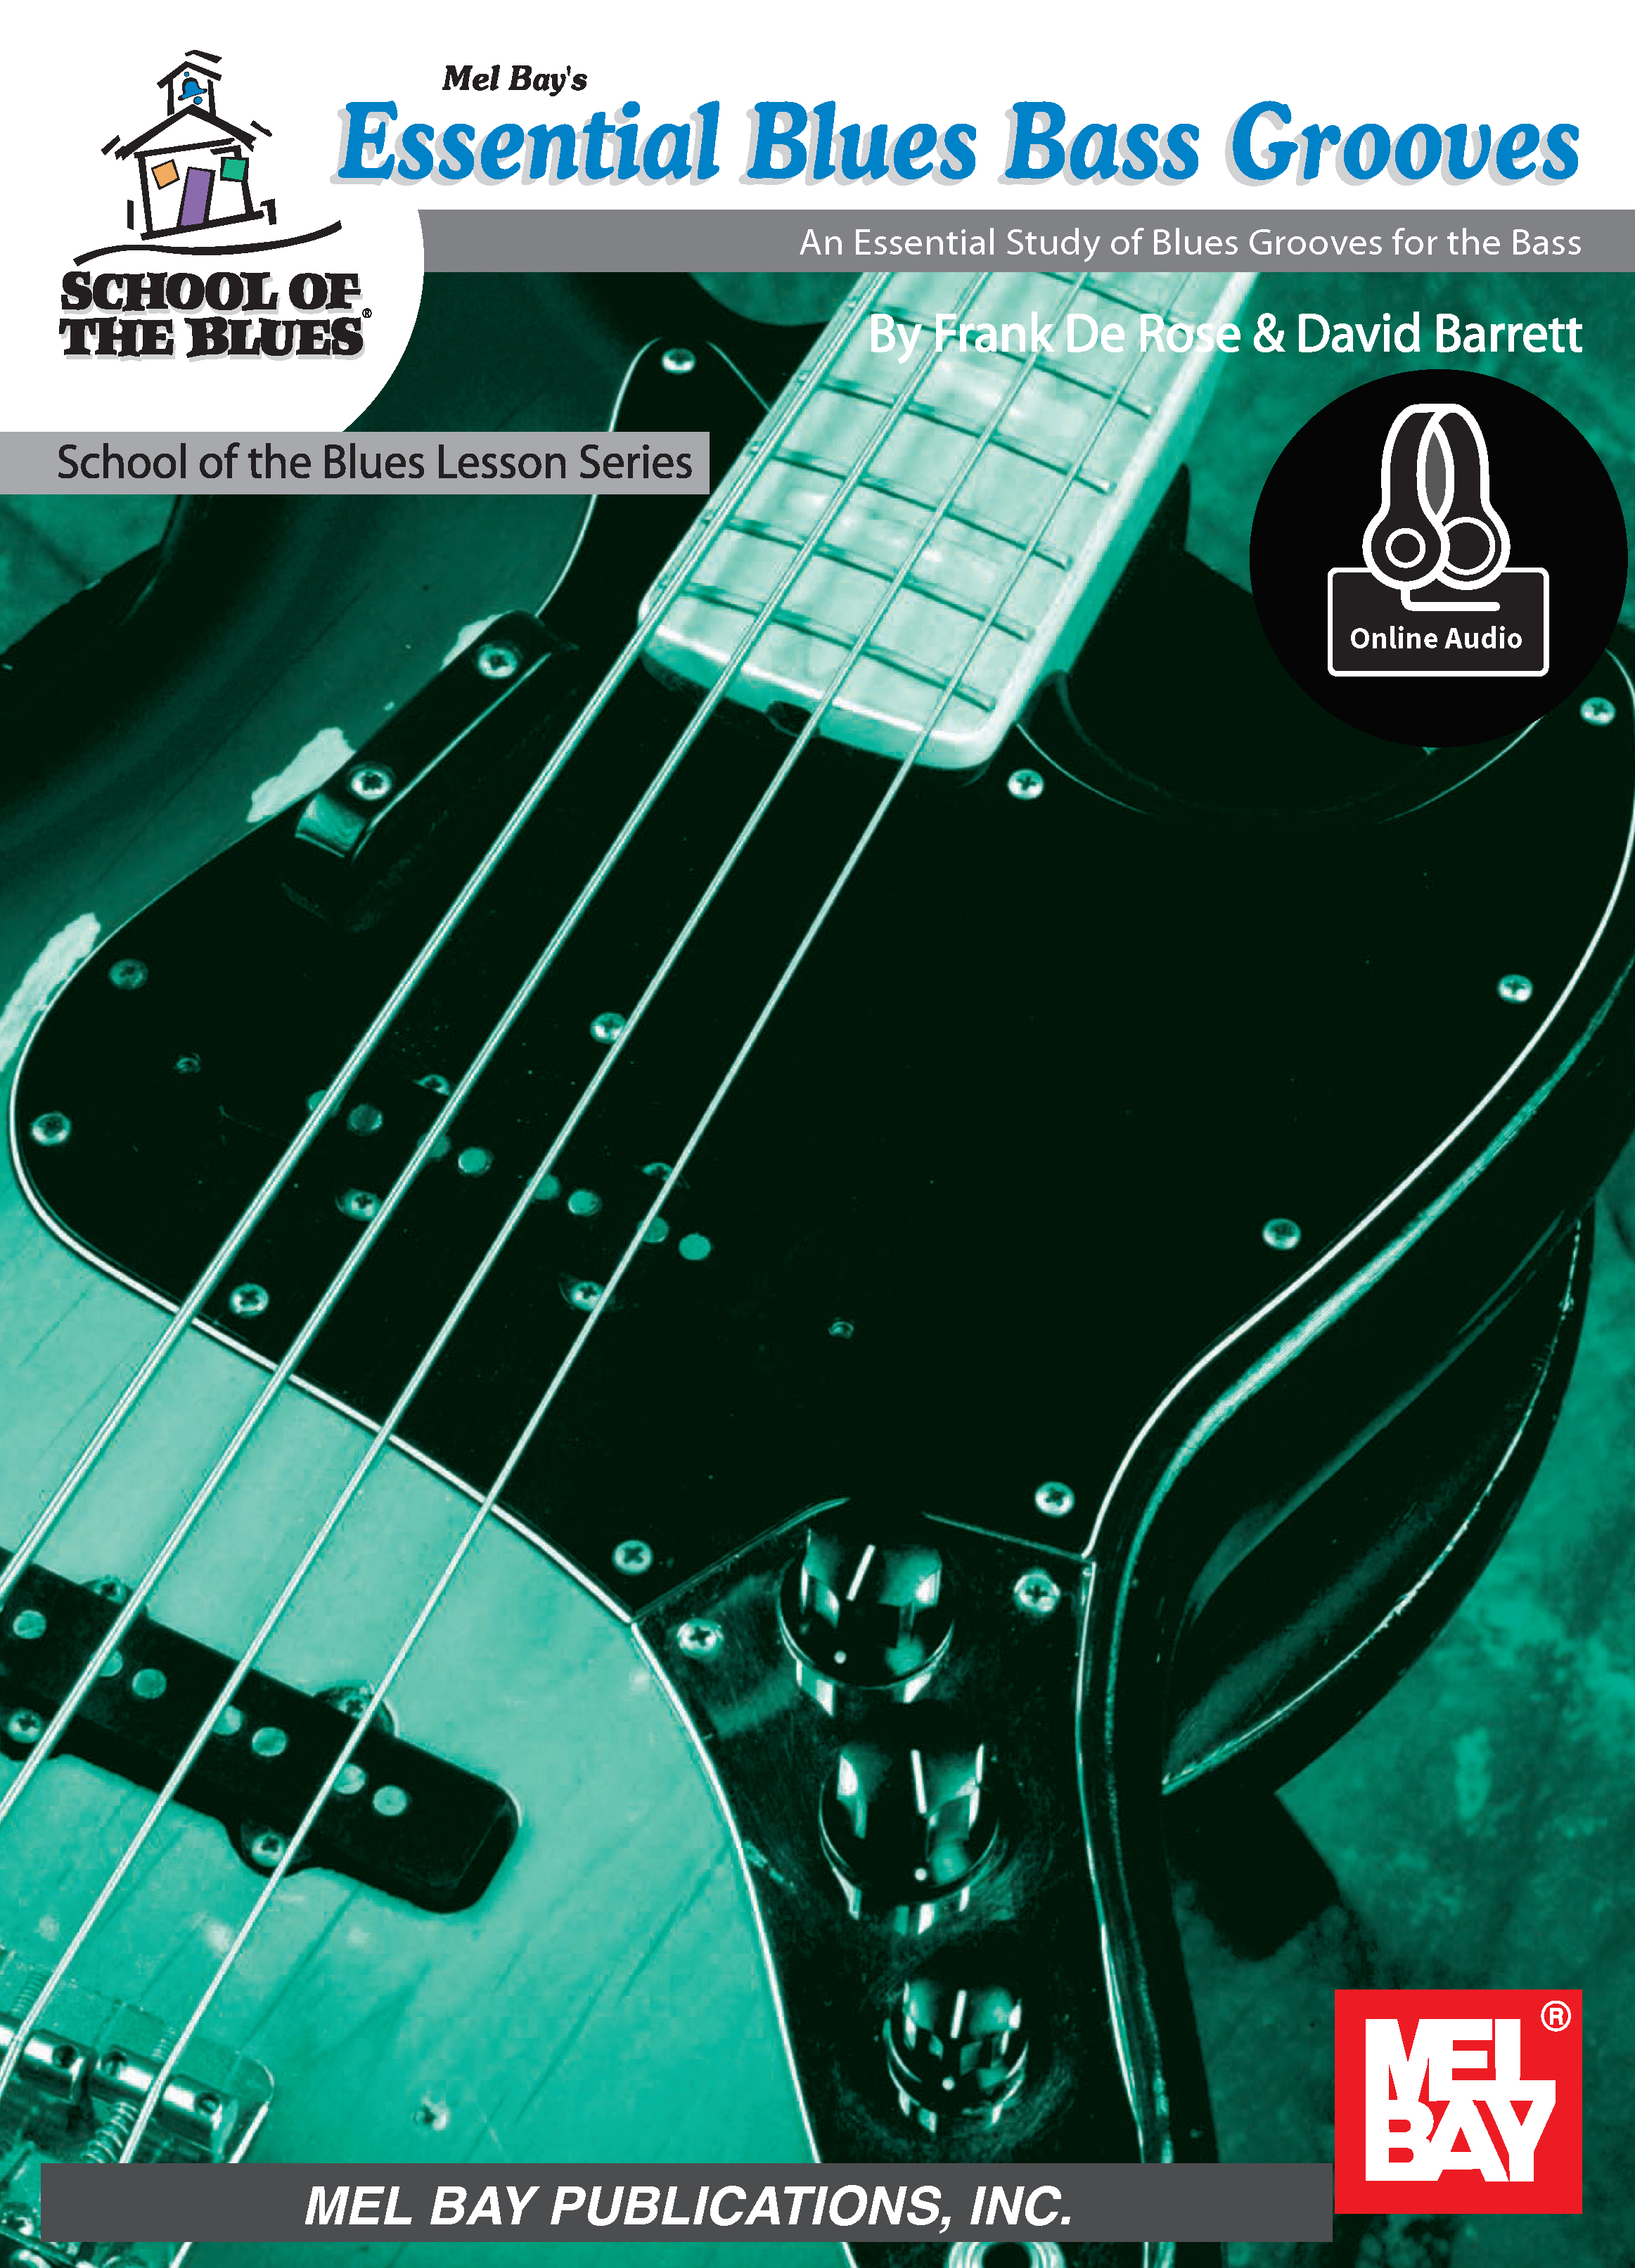 Essential Blues Bass Grooves